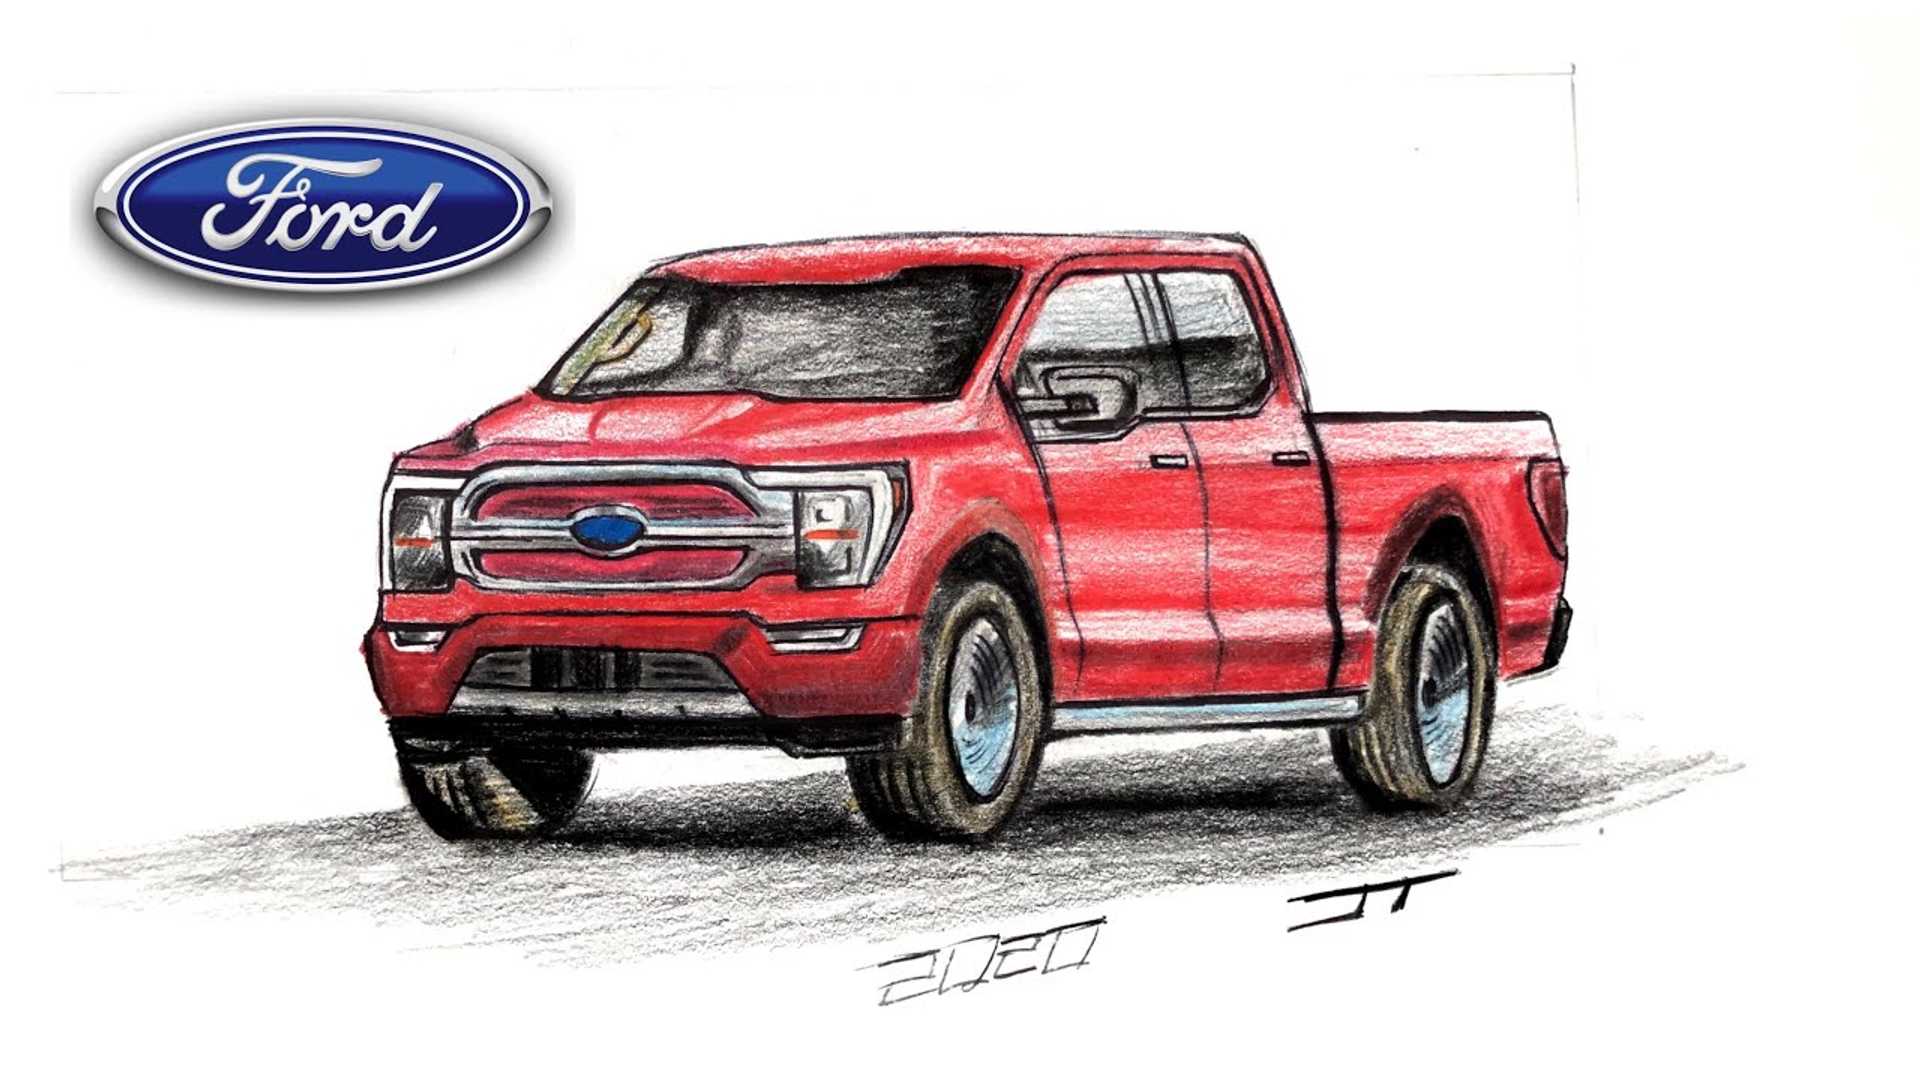 Free Download 2021 Ford F 150 Wallpaper [1920x1080] For Your Desktop, Mobile & Tablet. Explore Ford F 150 2021 Wallpaper. Ford F 150 Wallpaper, Ford F 150 Wallpaper, 2015 Ford F 150 Wallpaper